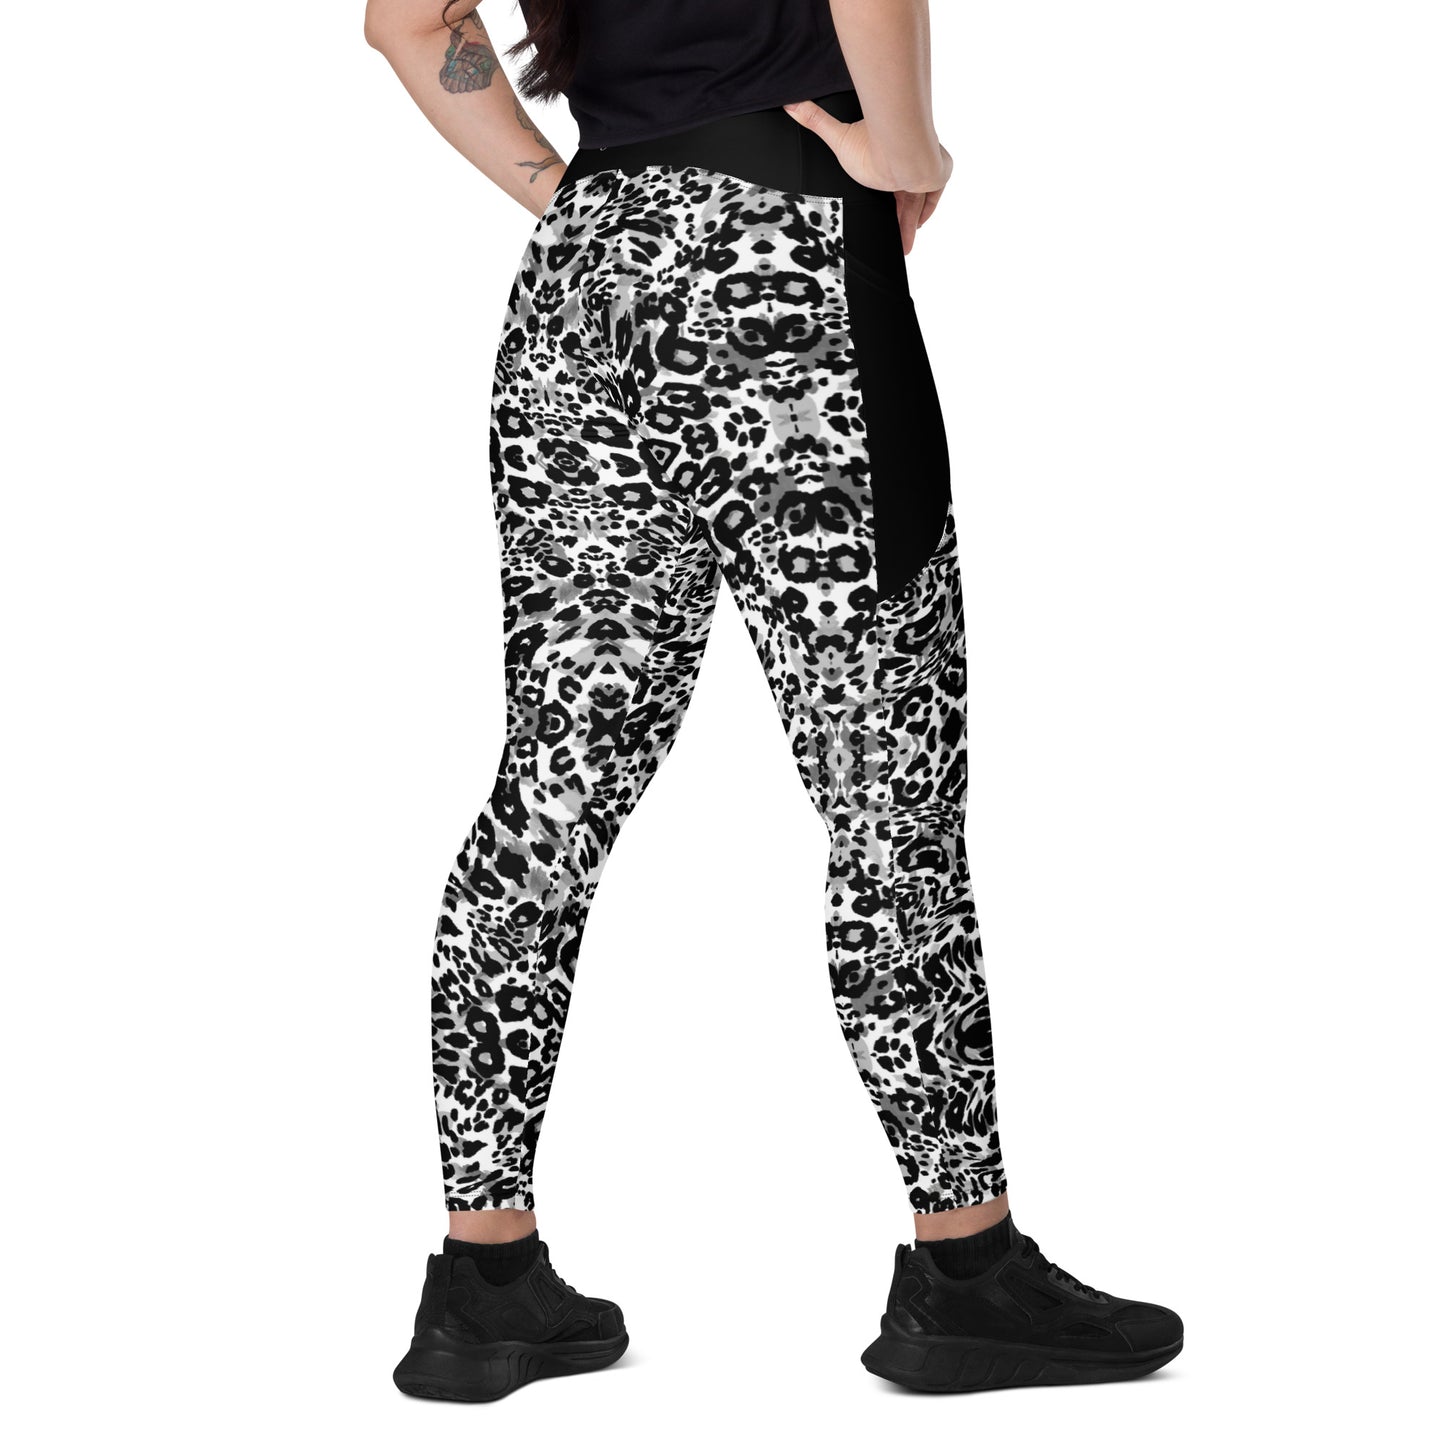 Inkblot - Leggings with pockets, Tight fit, High-waisted